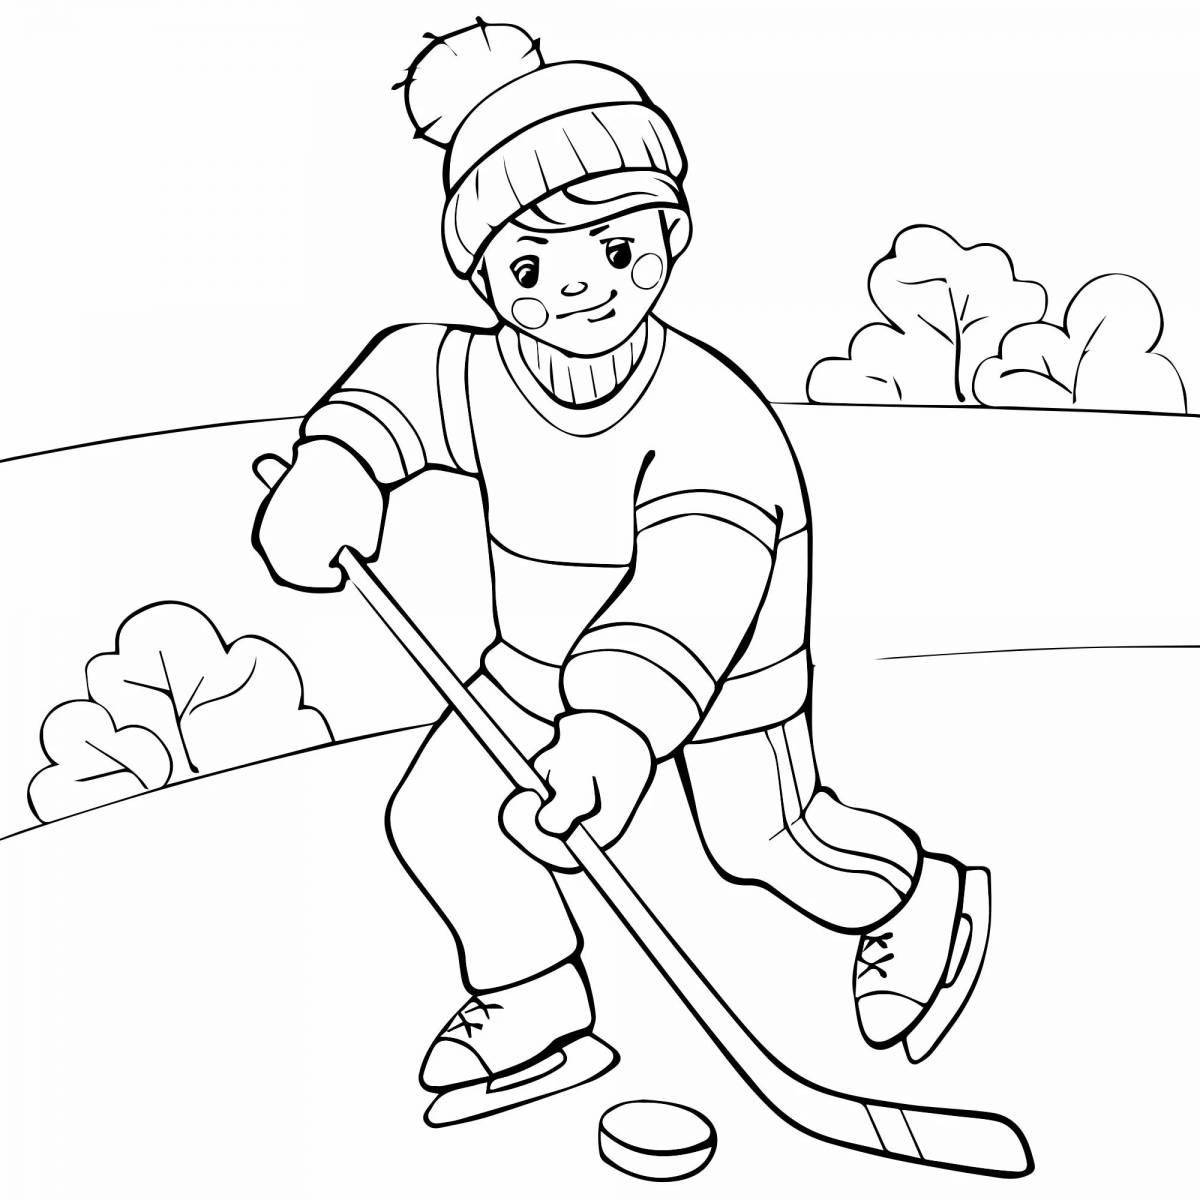 Colorful sports coloring book for children 6-7 years old